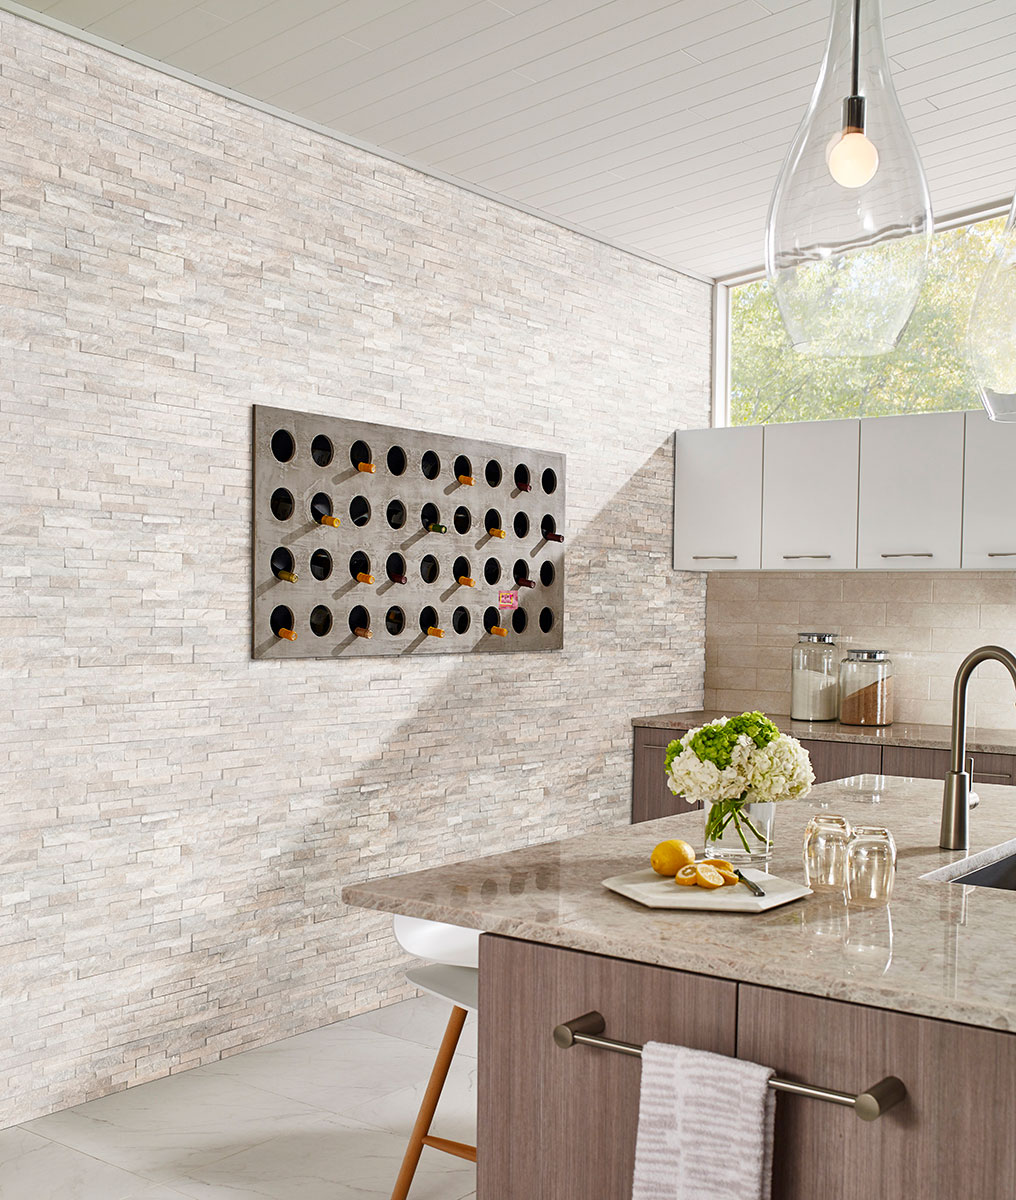 Arctic White Mini Stacked Stone accent wall in kitchen